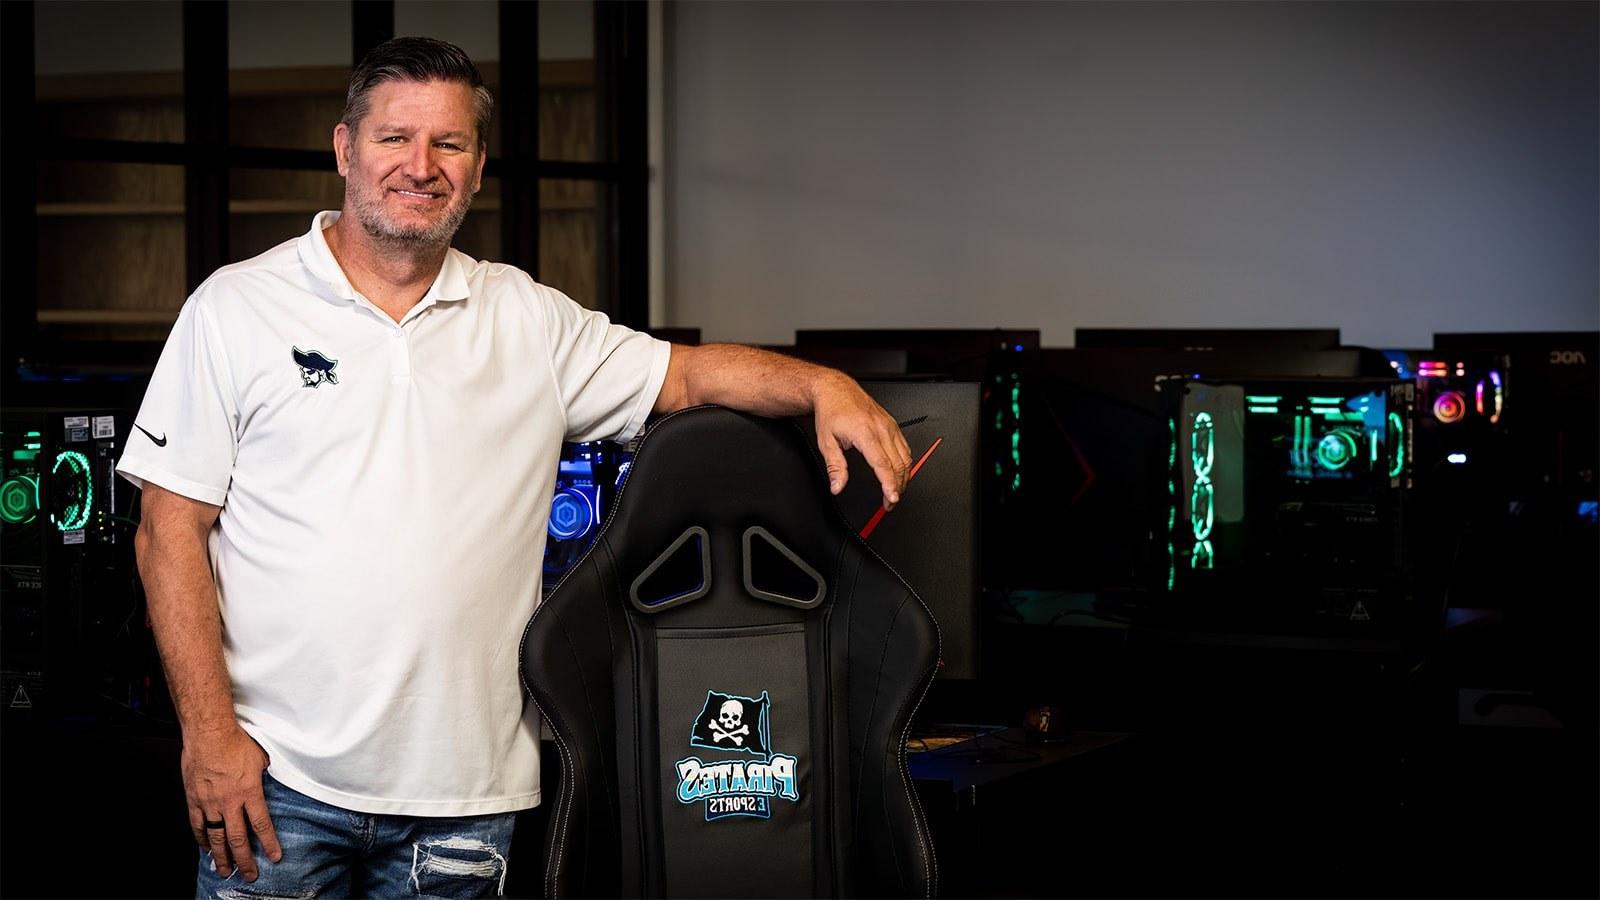 Scott Brumfield站在游戏电脑前. He is next to a PSC Pirates gaming chair 和 is wearing a Pirates shirt.